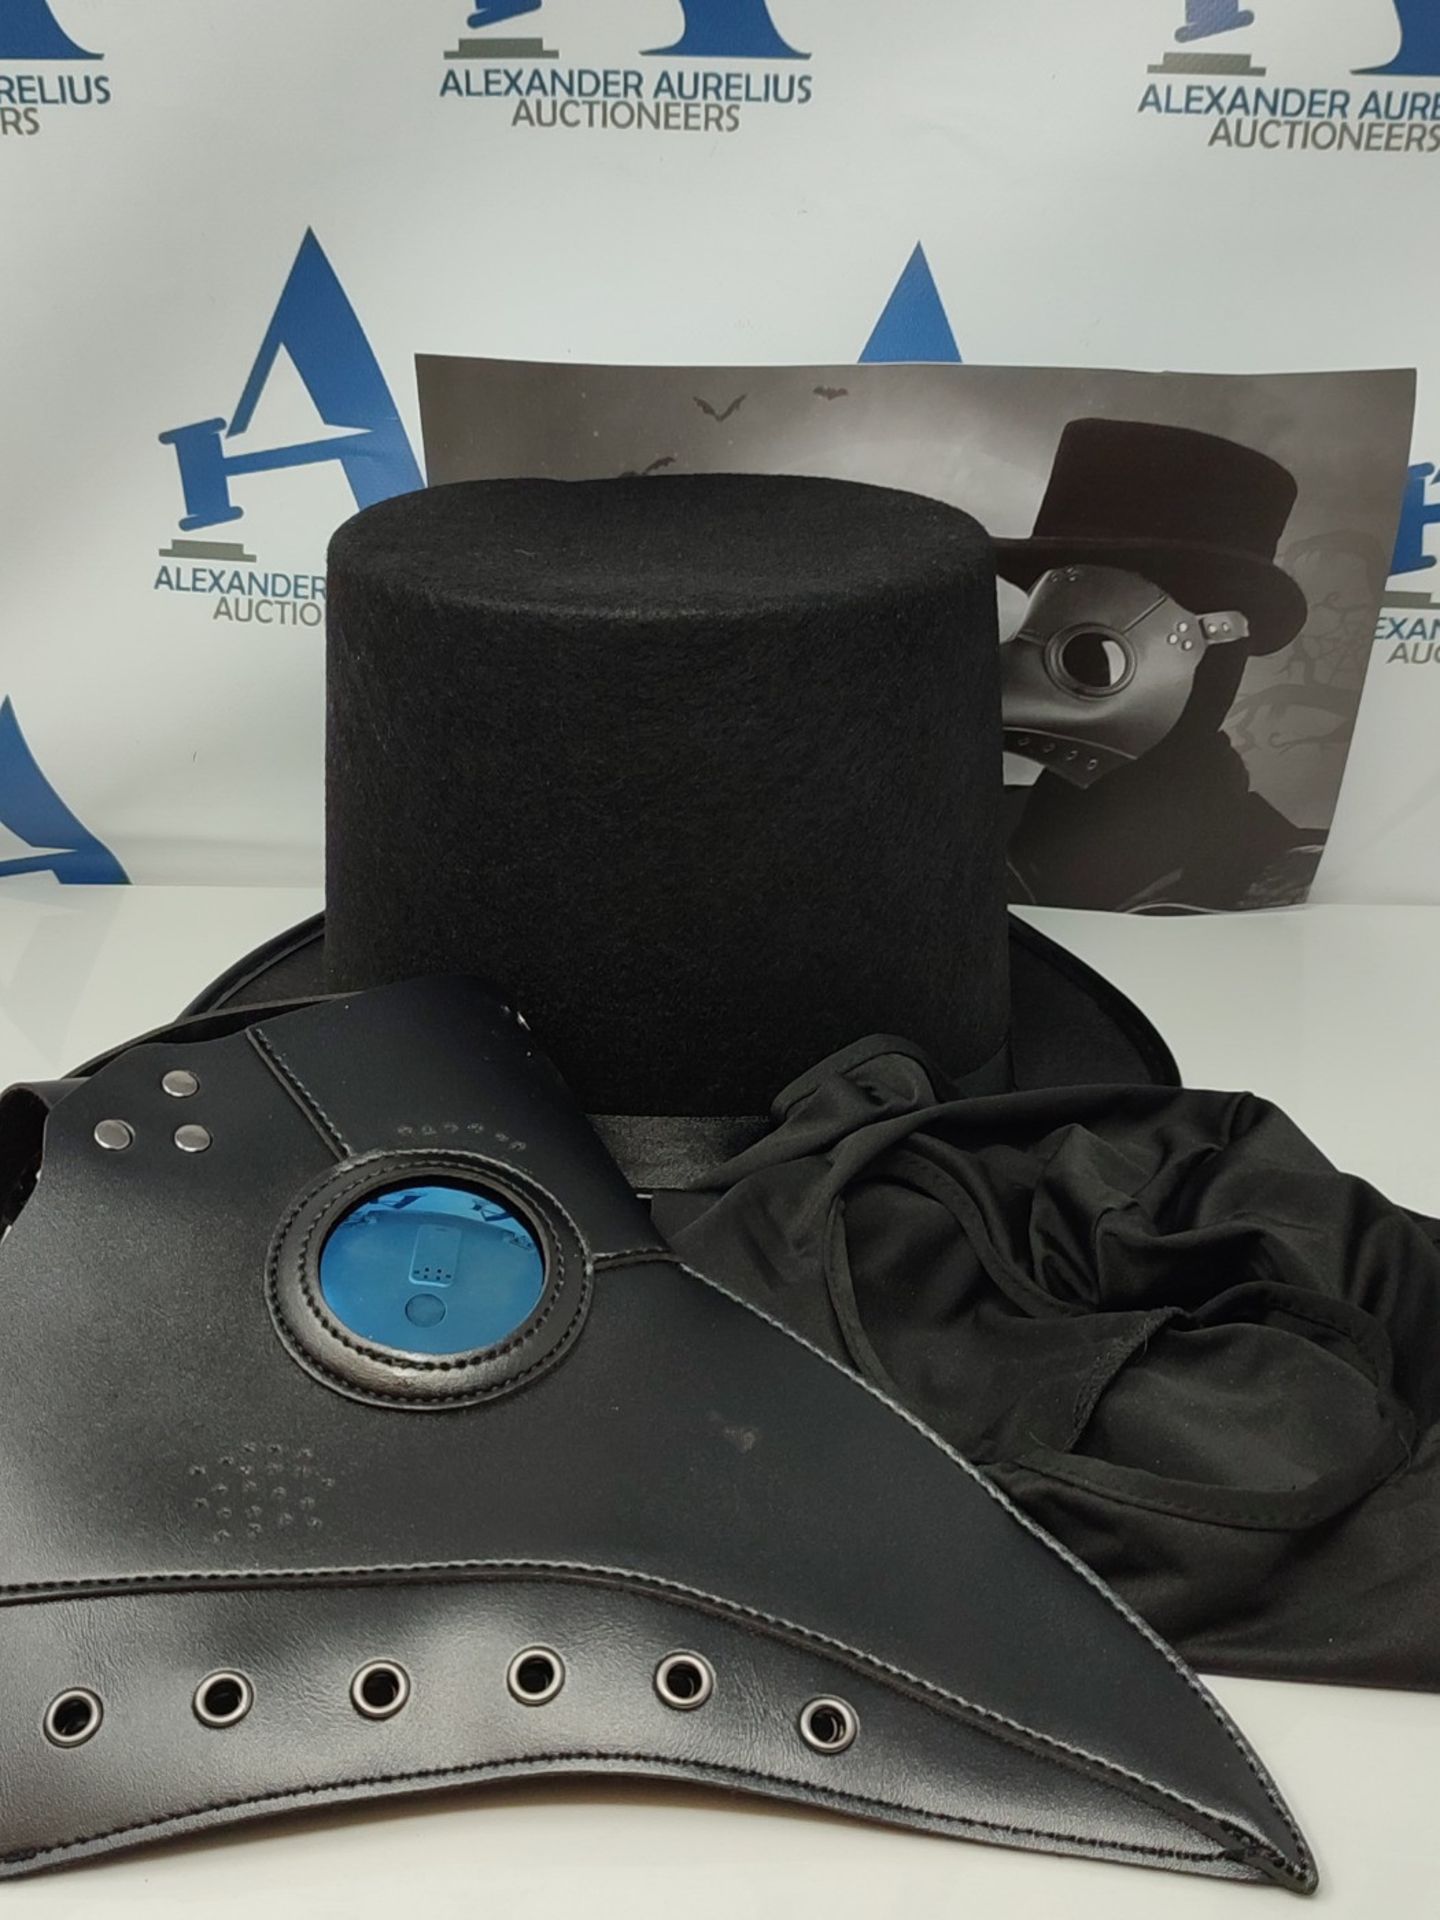 Raxwalker Plague Doctor Mask Costume Set Leather Masks With Top Hat for Adult Hallowee - Image 2 of 2